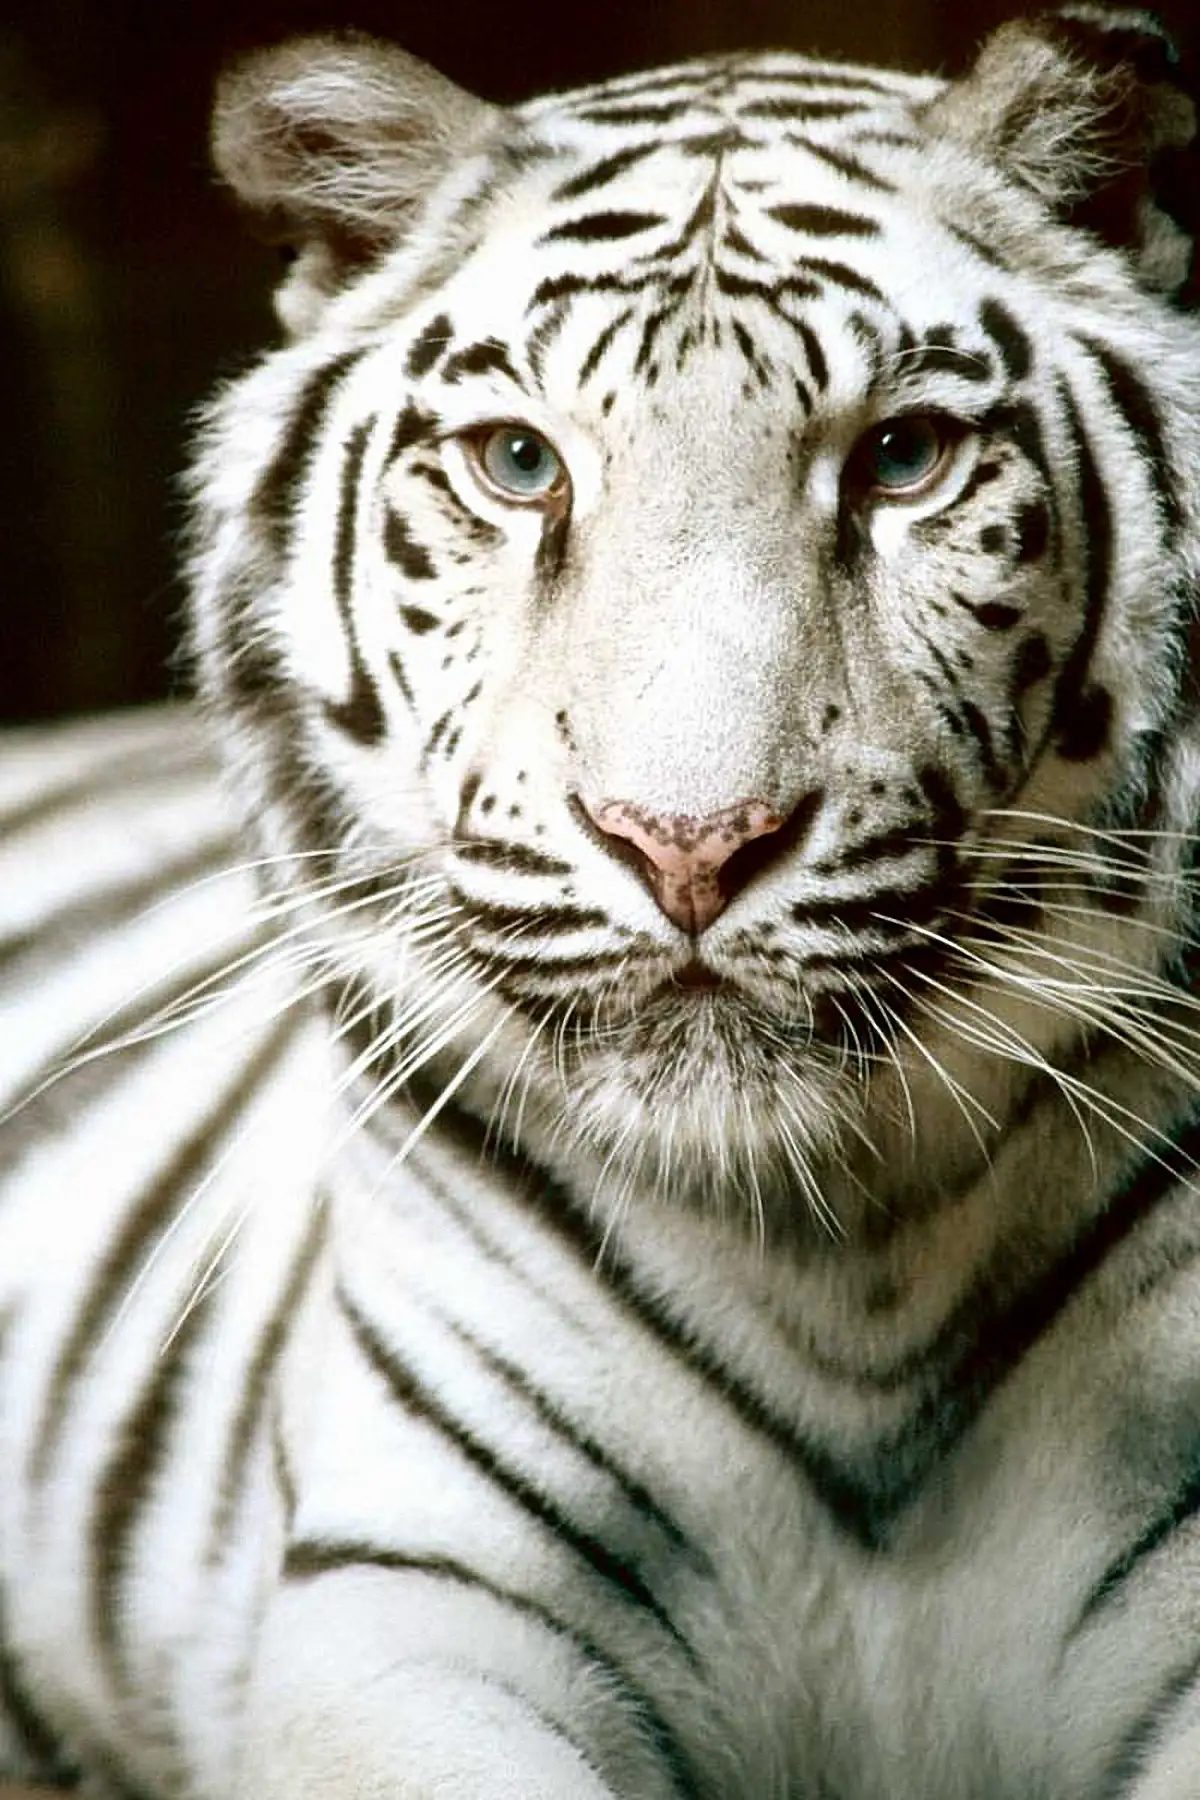 100 Fun White Tiger Facts For Kids!